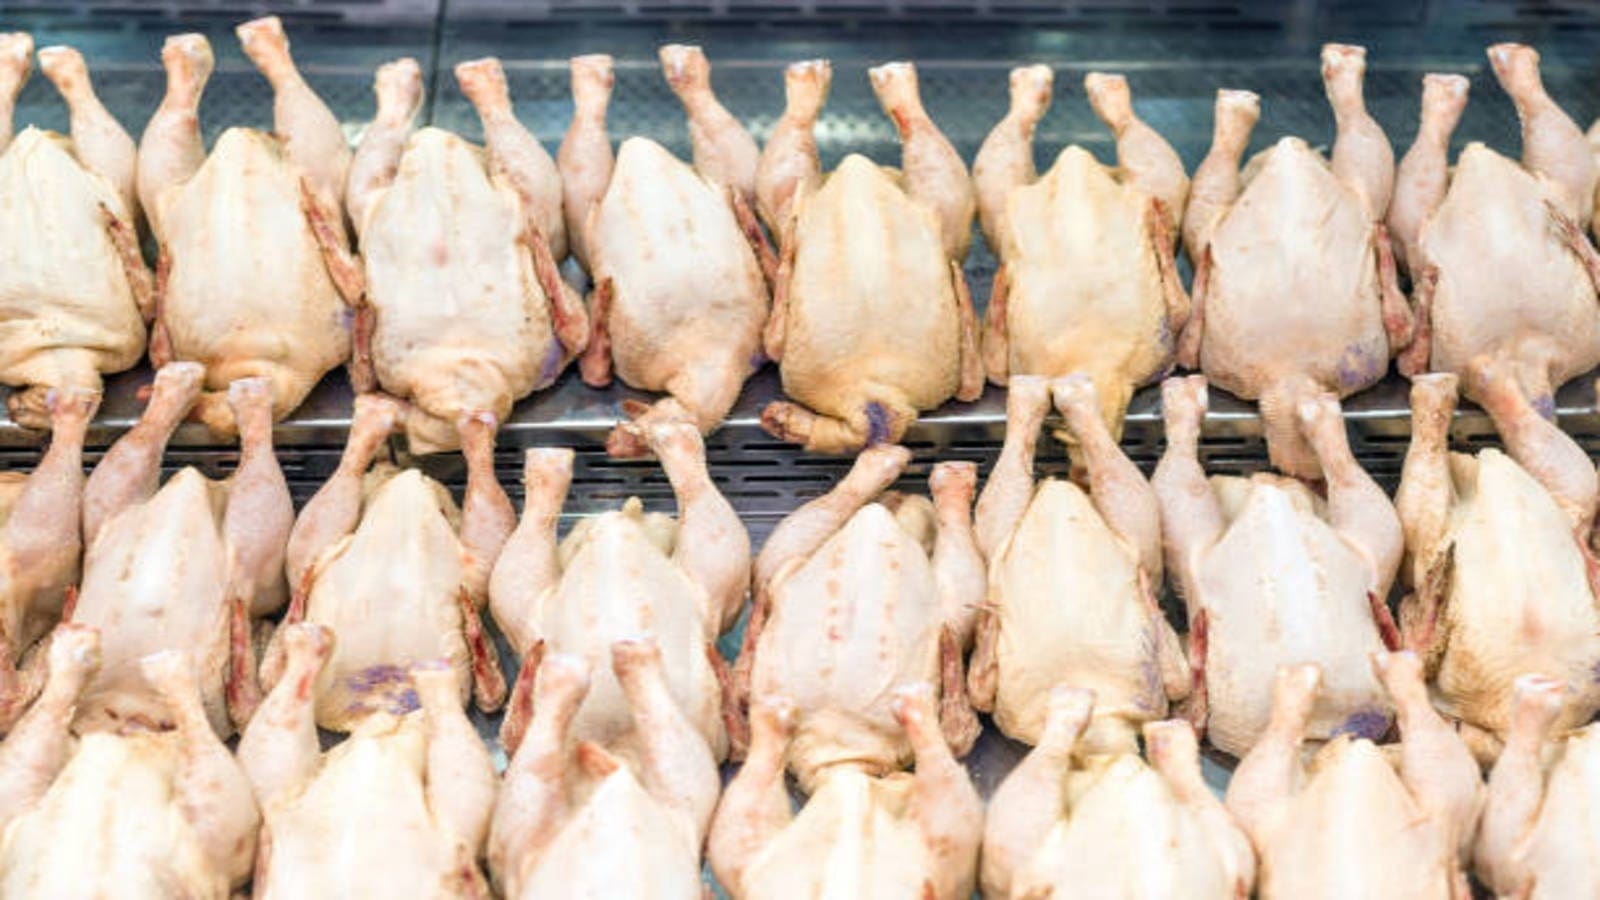 FSIS revises raw poultry guidelines to curb pathogens